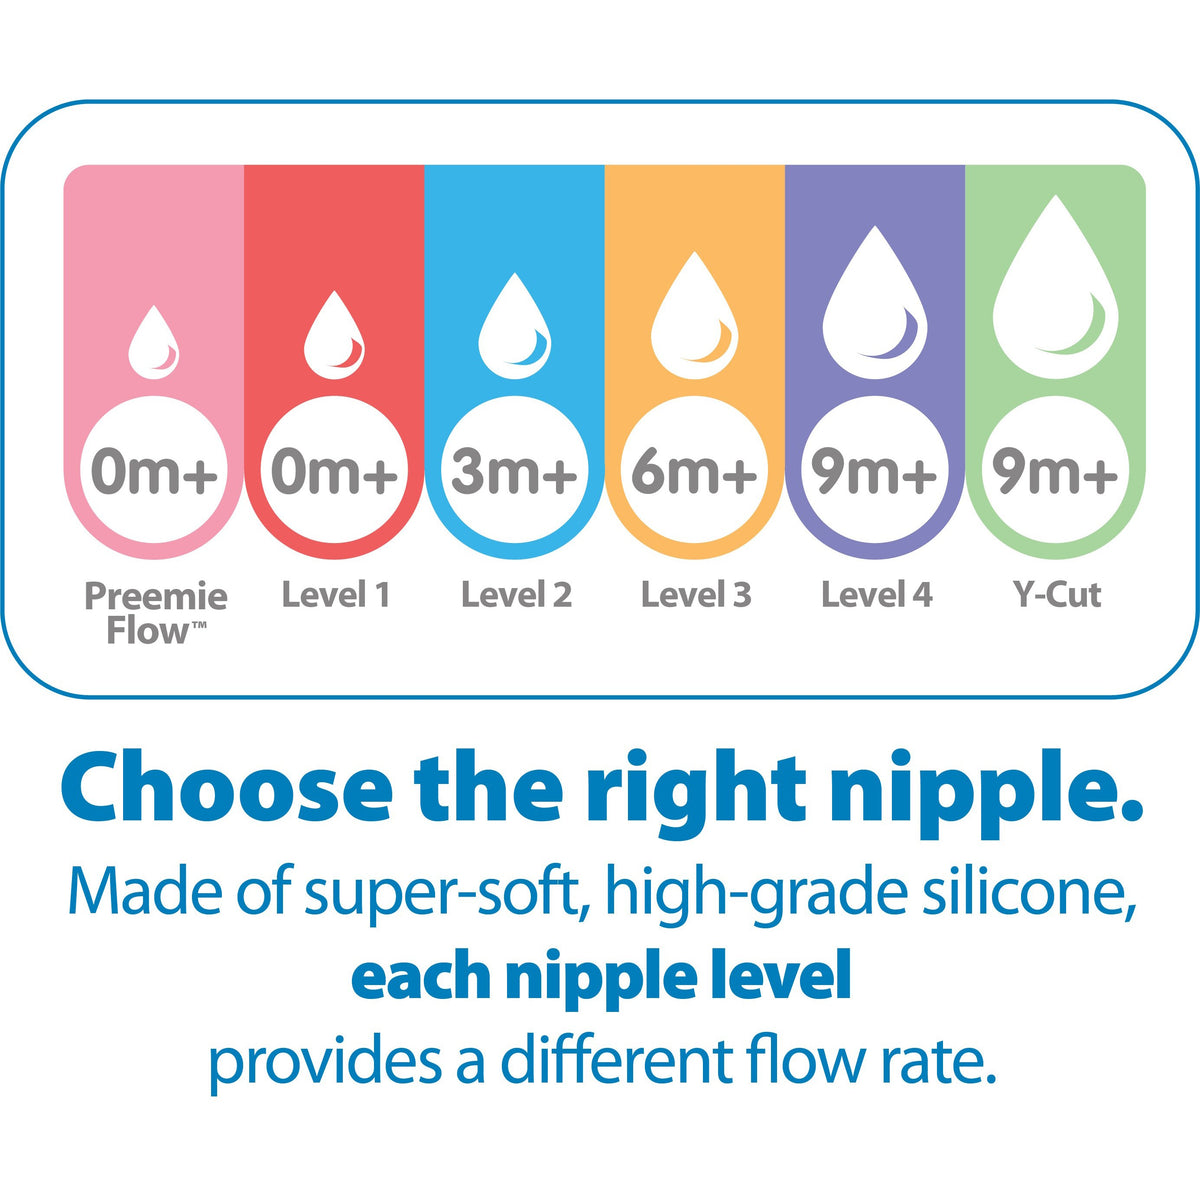 dr-browns-options-breast-like-silicone-nipples-2s-level-4-germany-9m- (3)